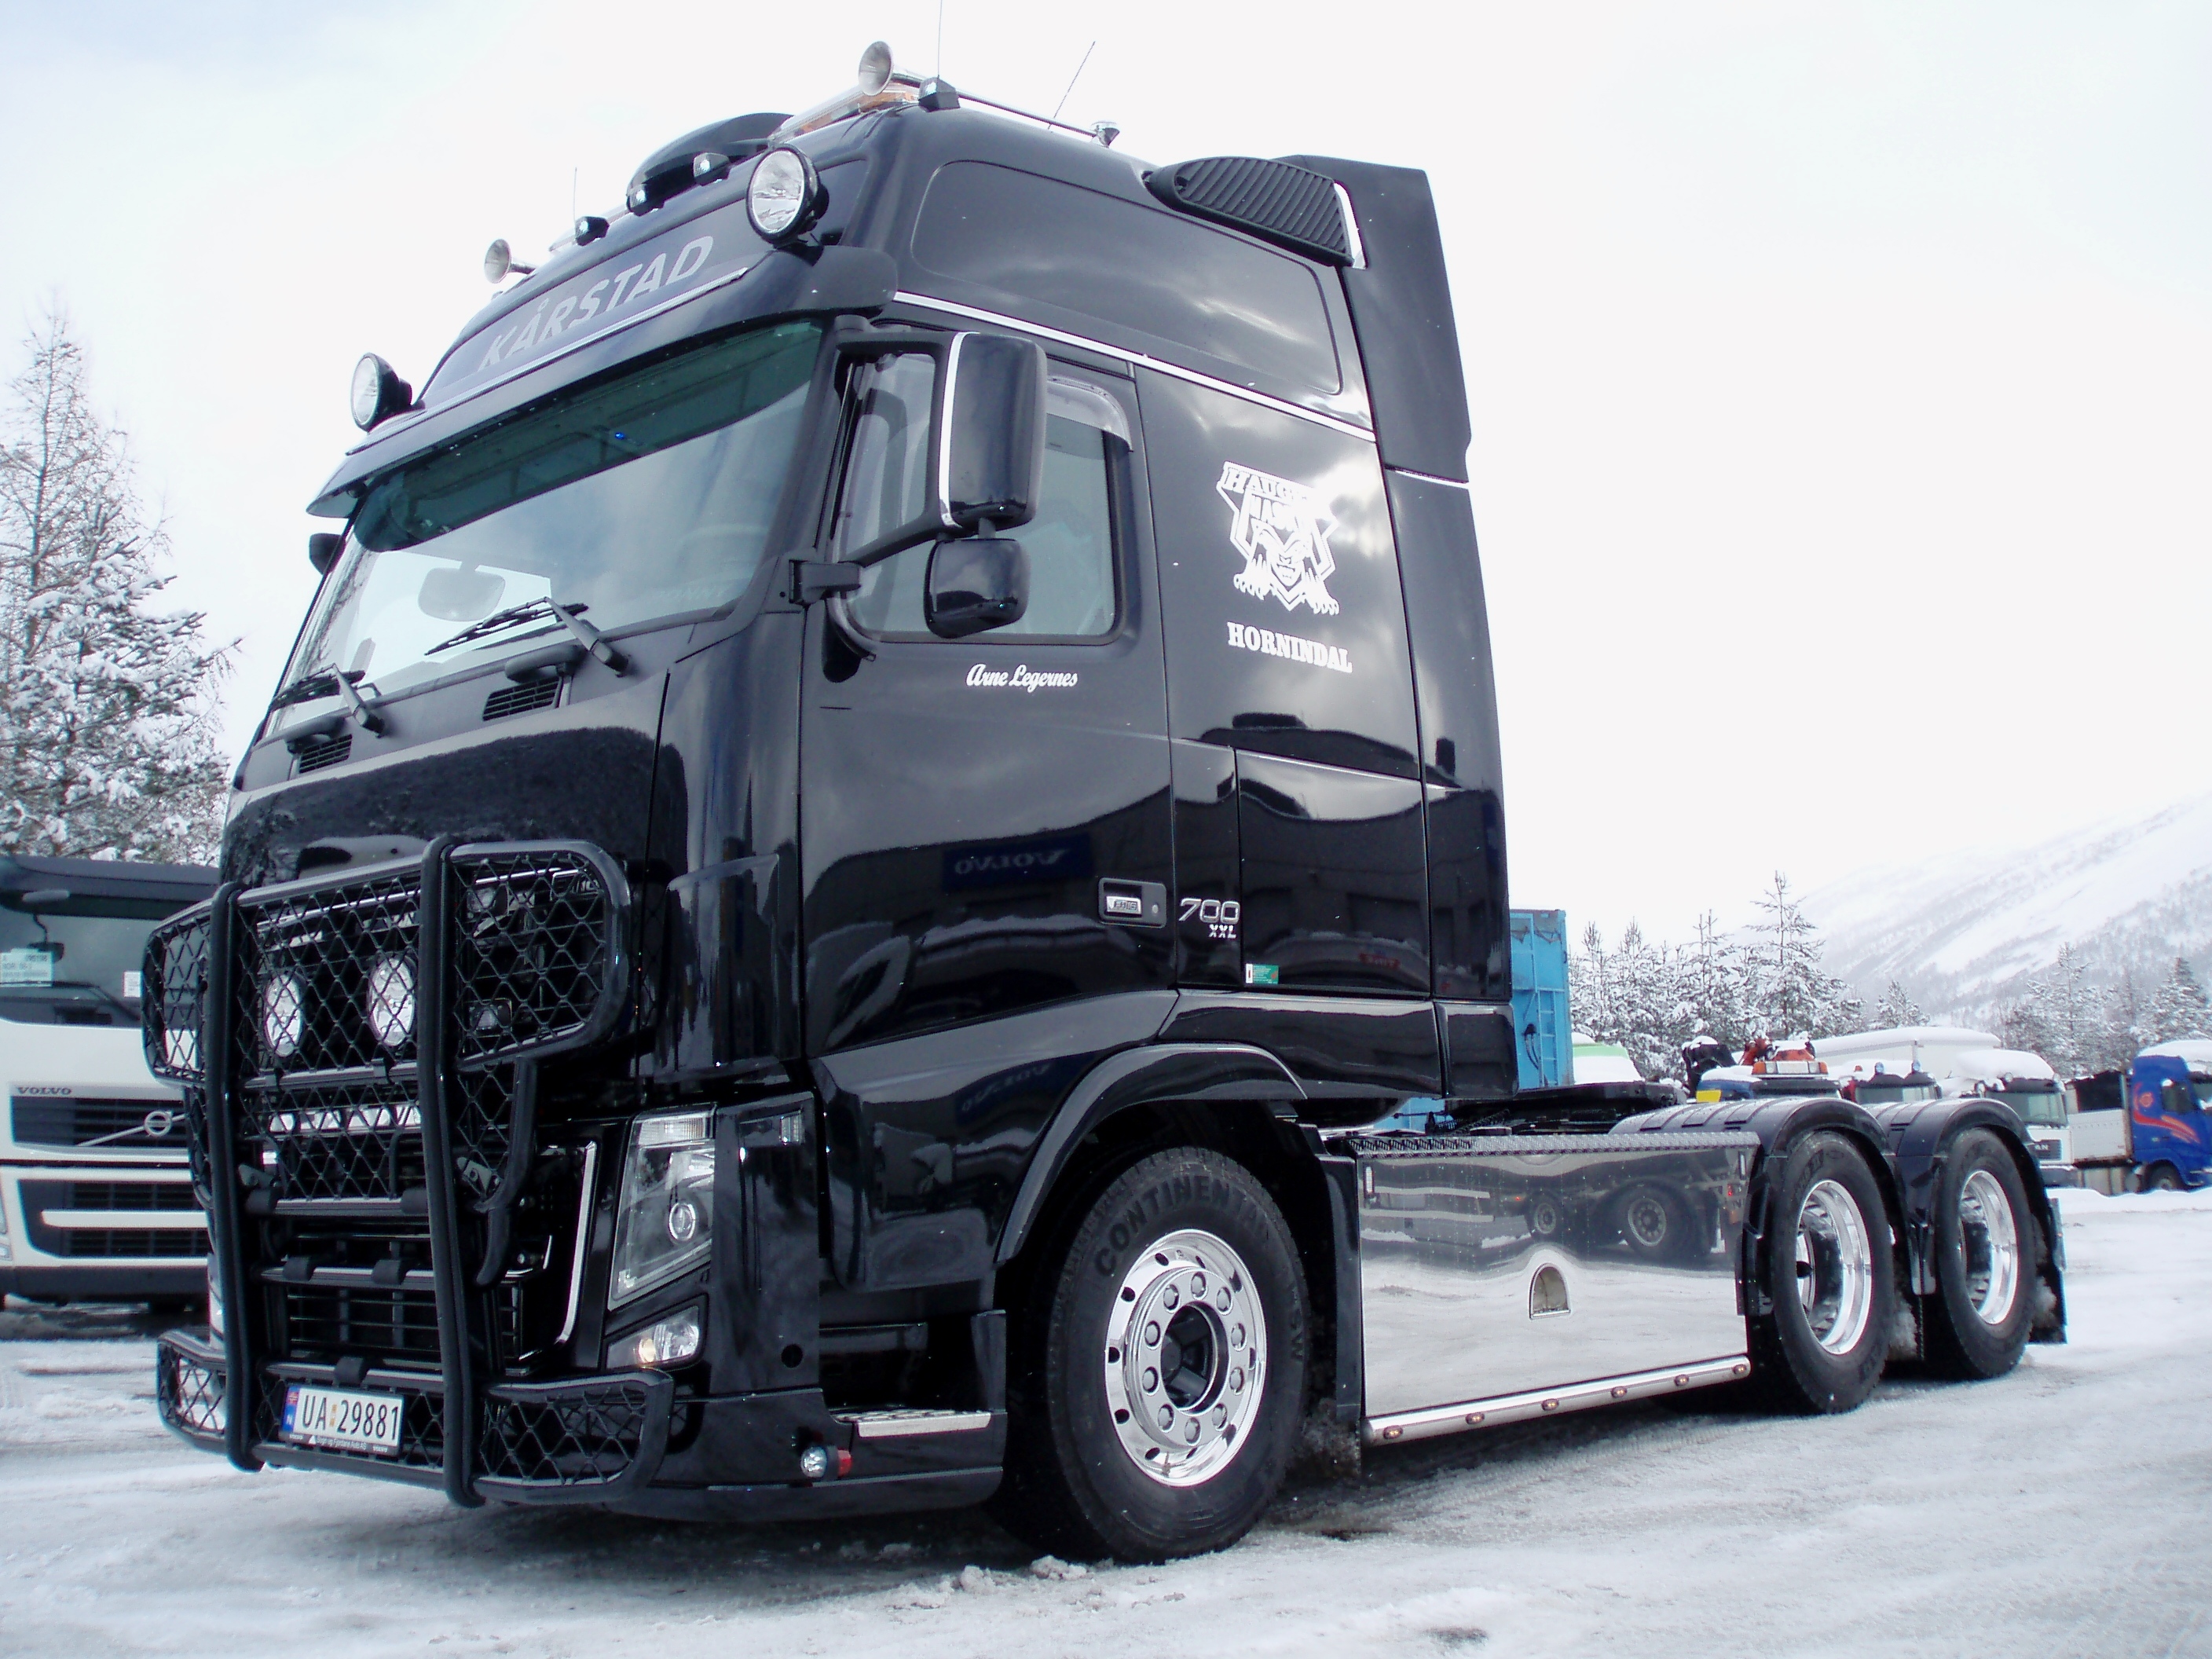 Commercialmotor.com - The Ultimate Volvo FH16.700 XXL! This is ...